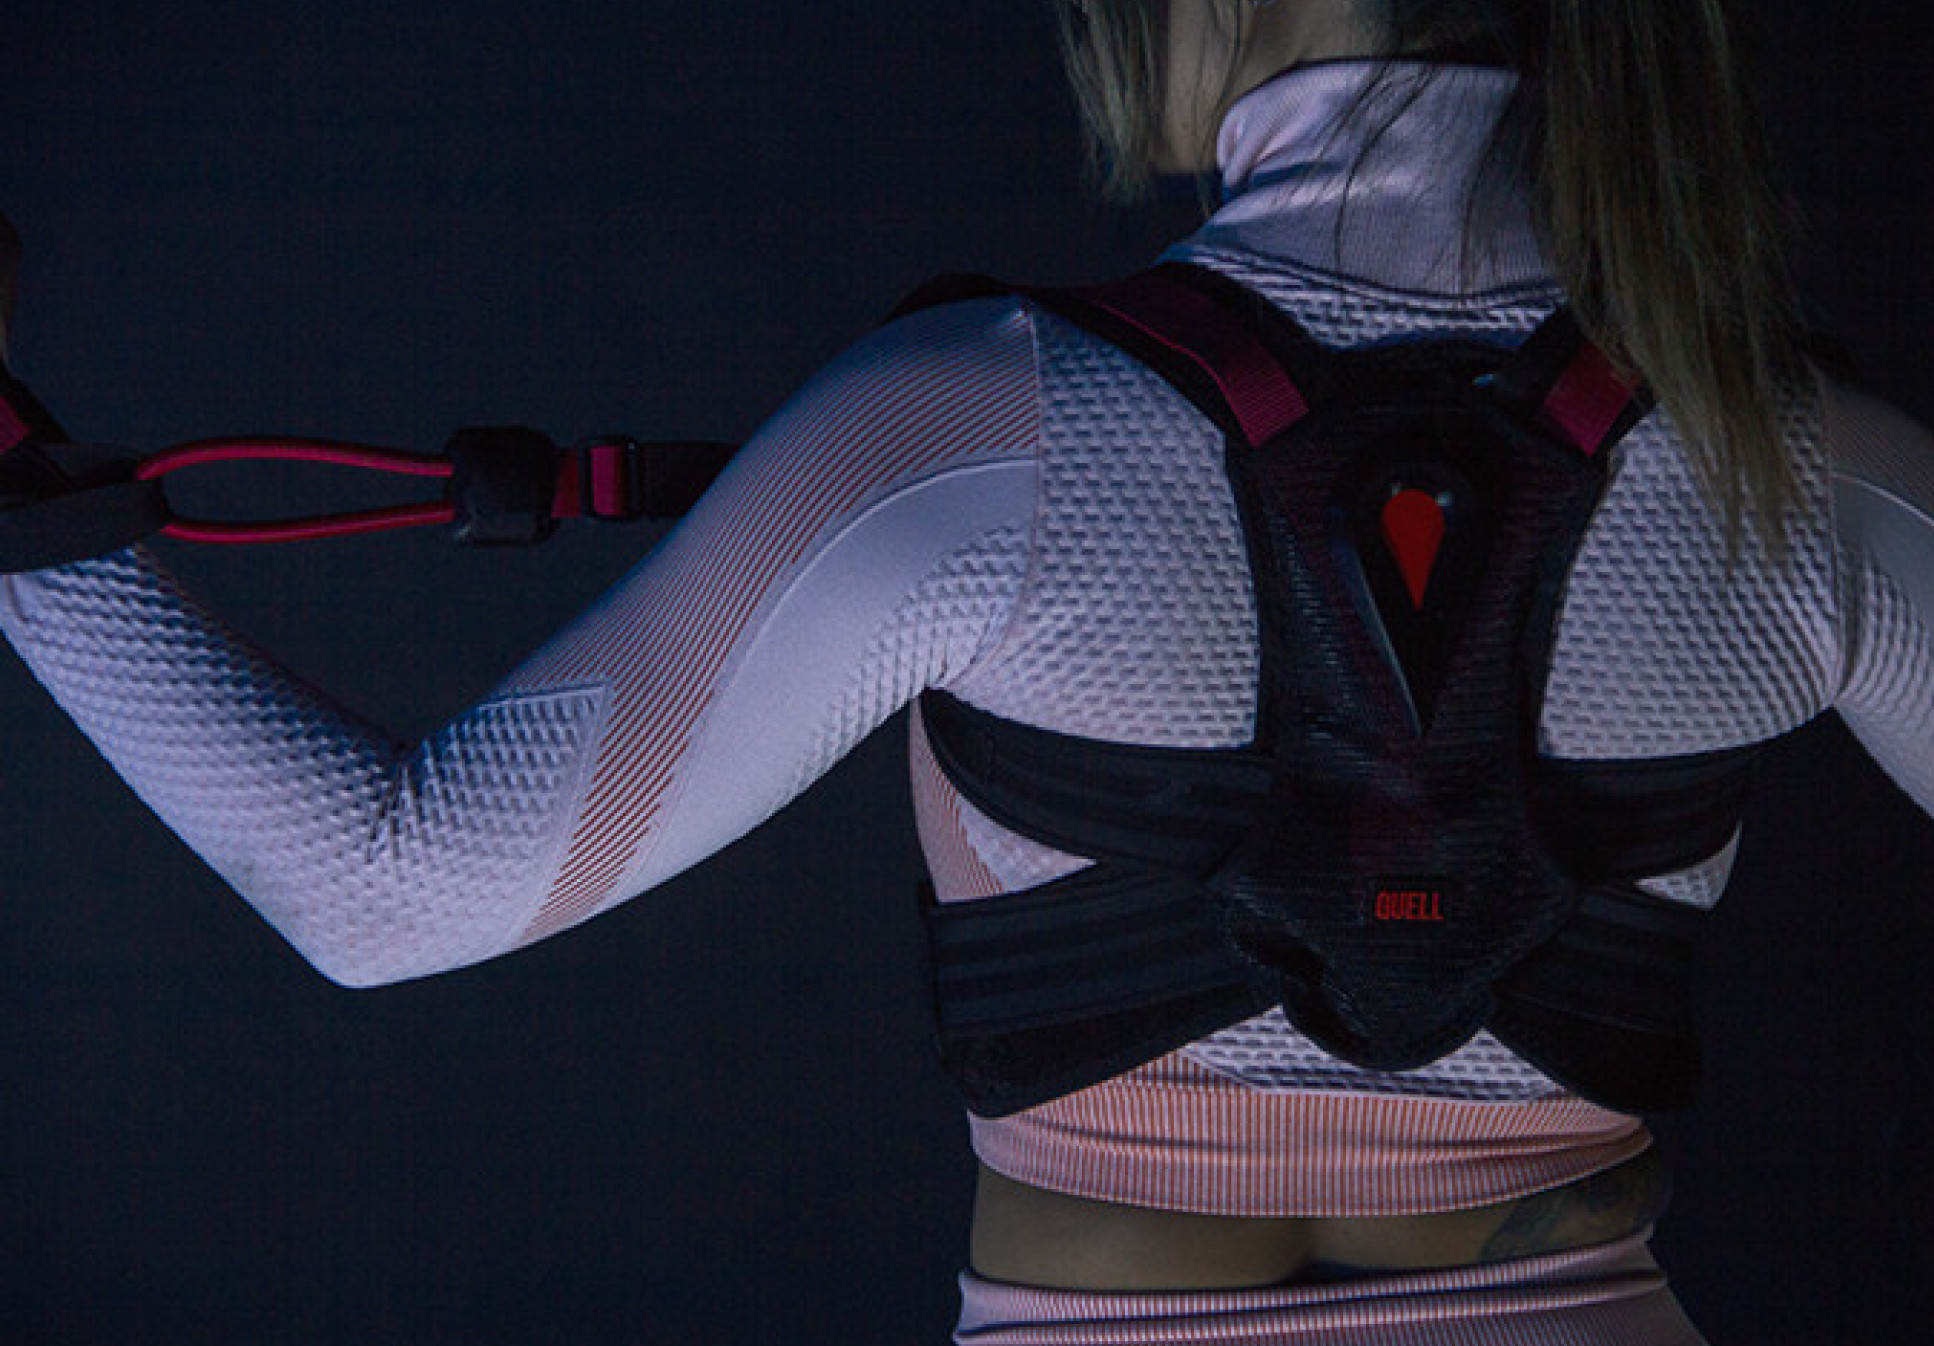 Quell's wearable harness